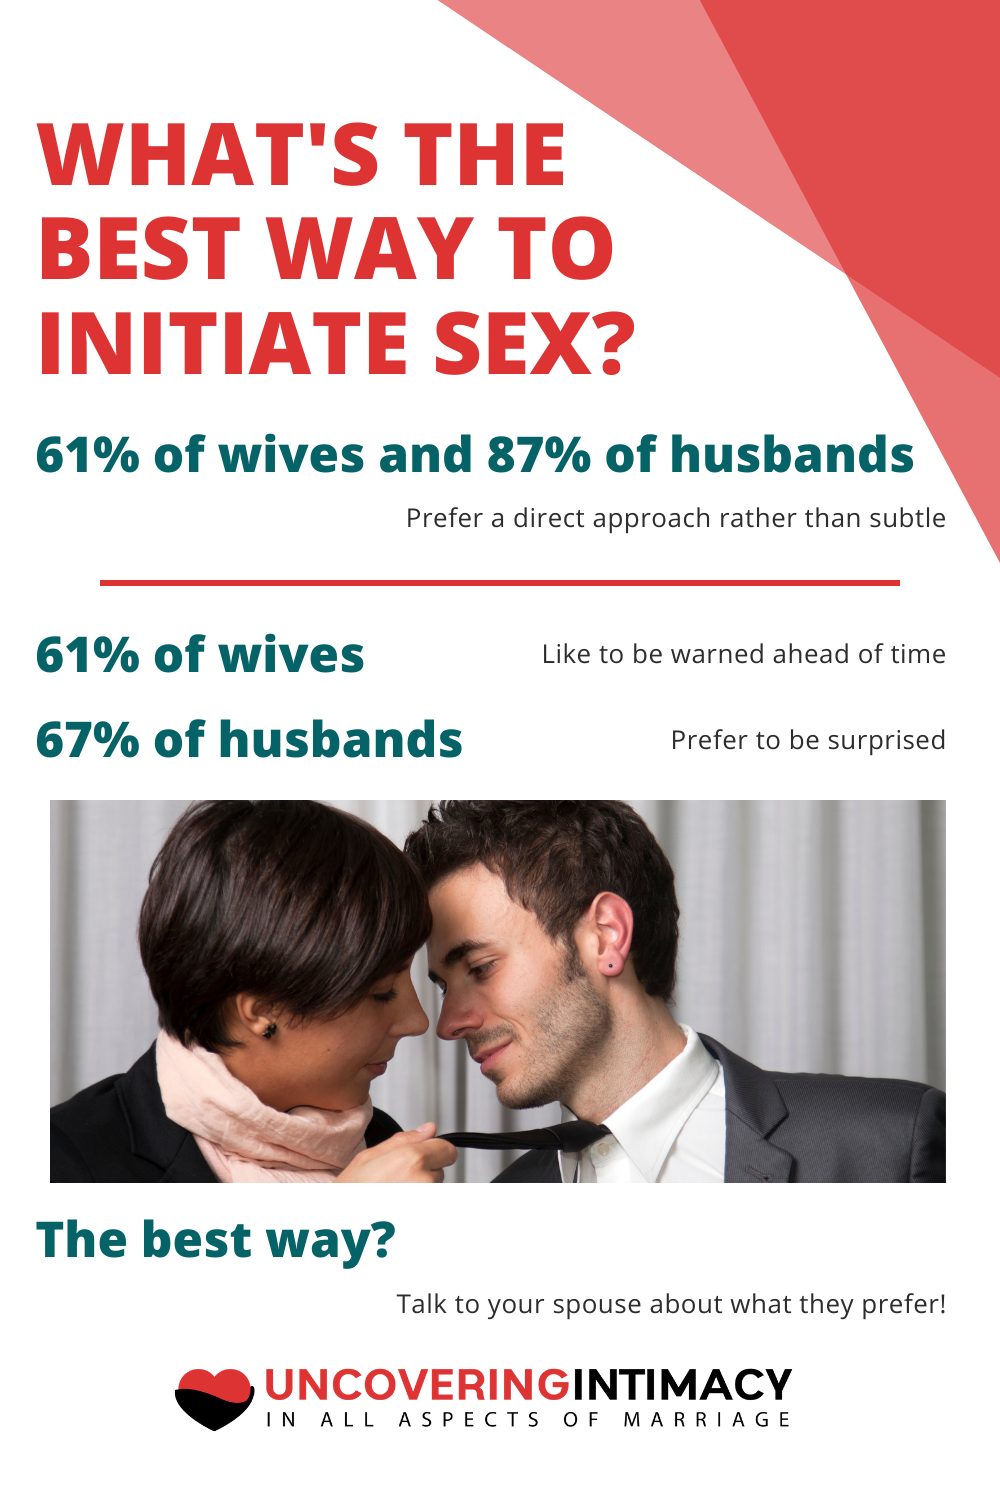 Whats the best way to initiate sex?